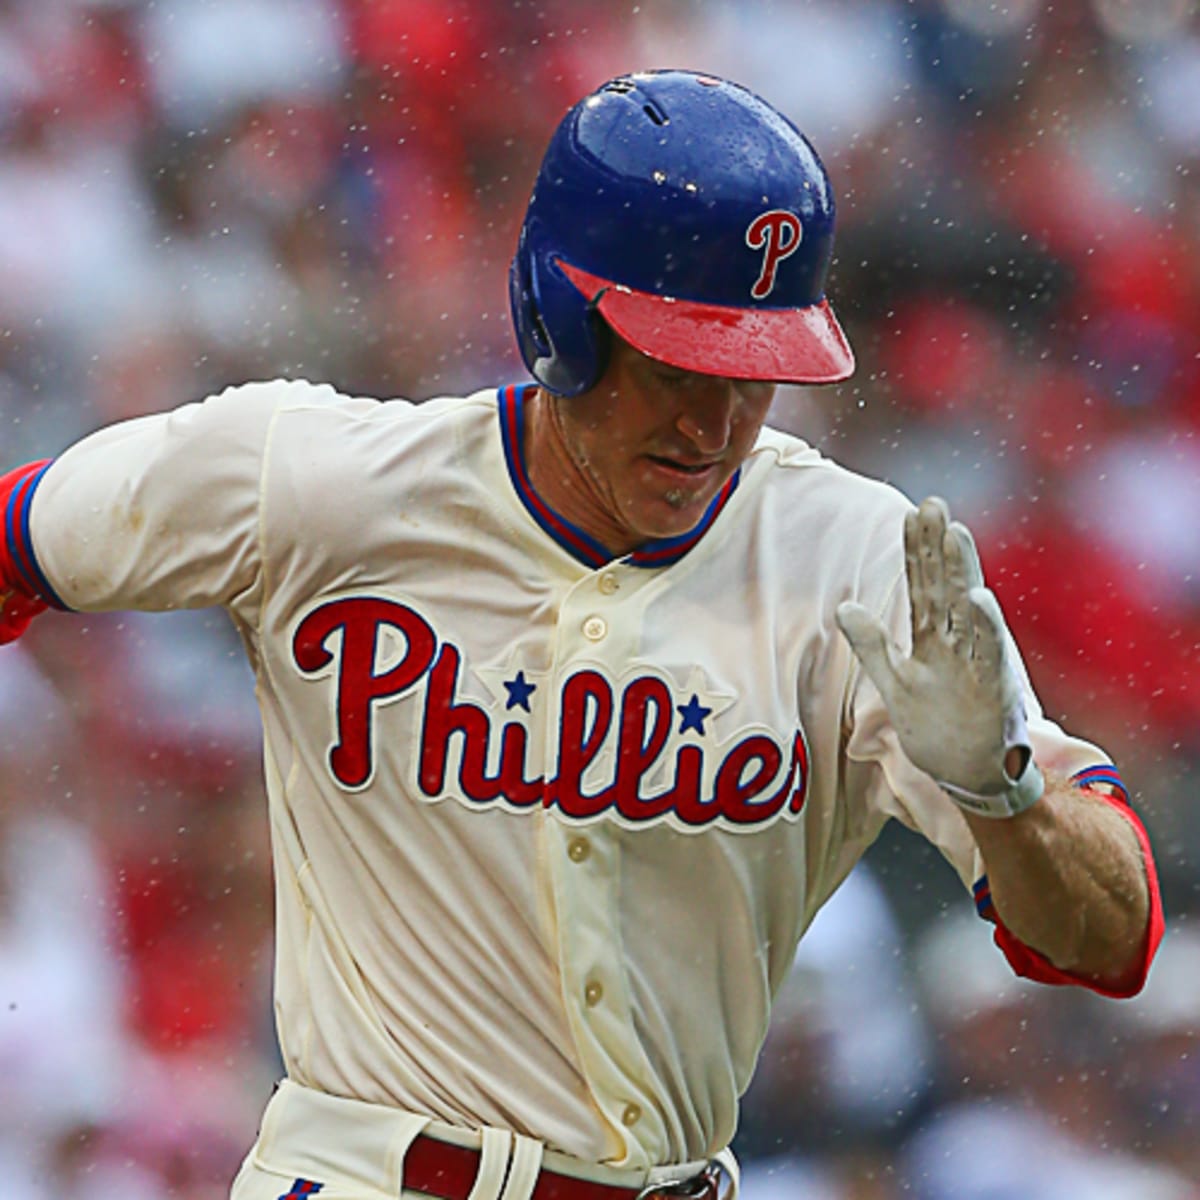 Larry Bowa in the middle of Philadelphia Phillies' rebuild